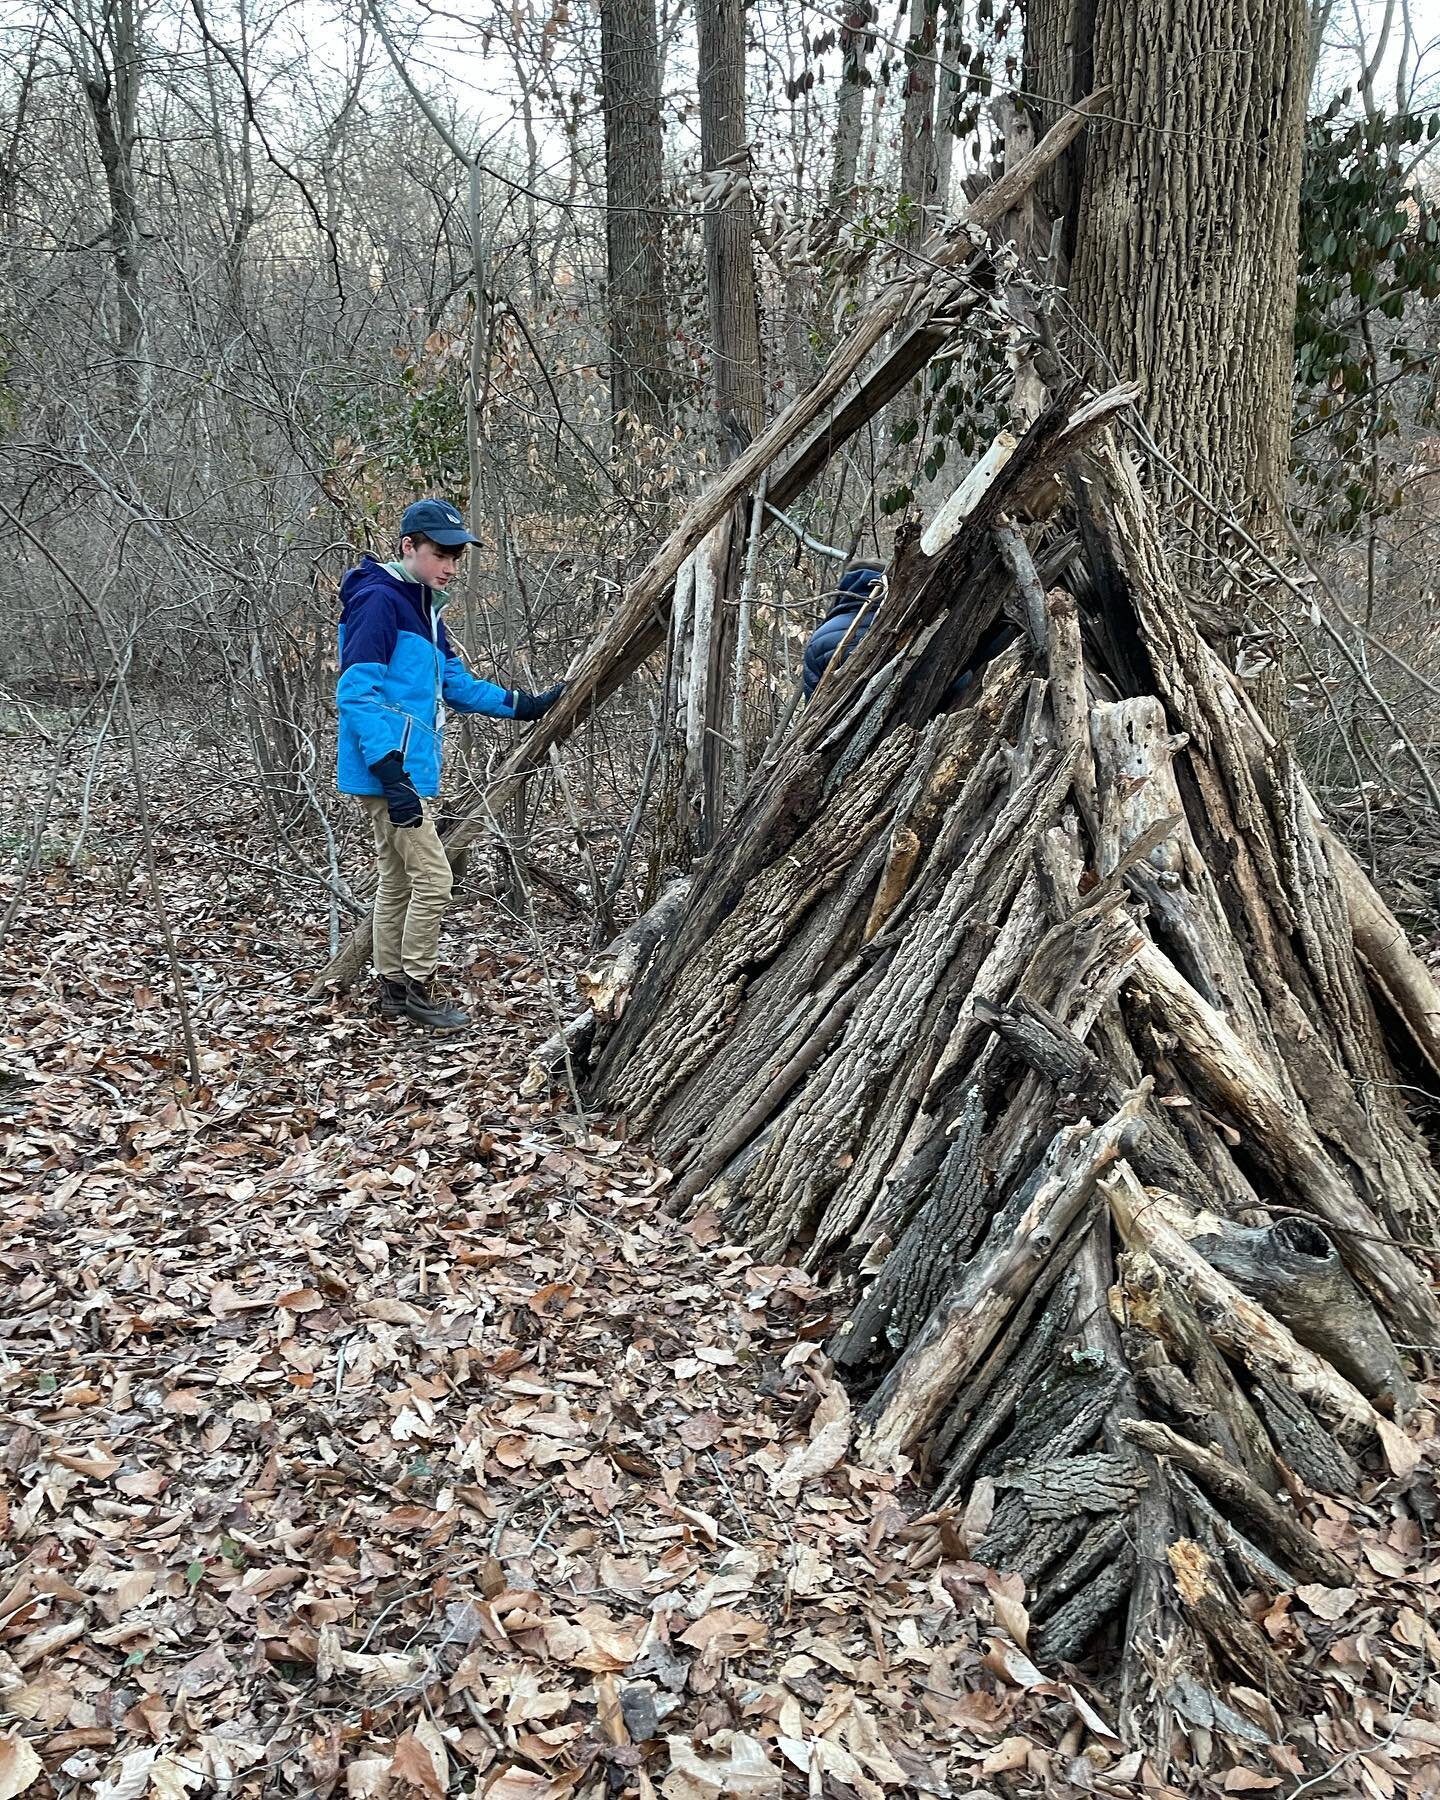 6-8th GRADERS! Interested in learning leadership and outdoor skills, exploring, etc? Sign-up for our Junior Crew program! We still have a few spots available for session starting Monday. Tell your friends and sign up on our website!

#elementsdc #opt